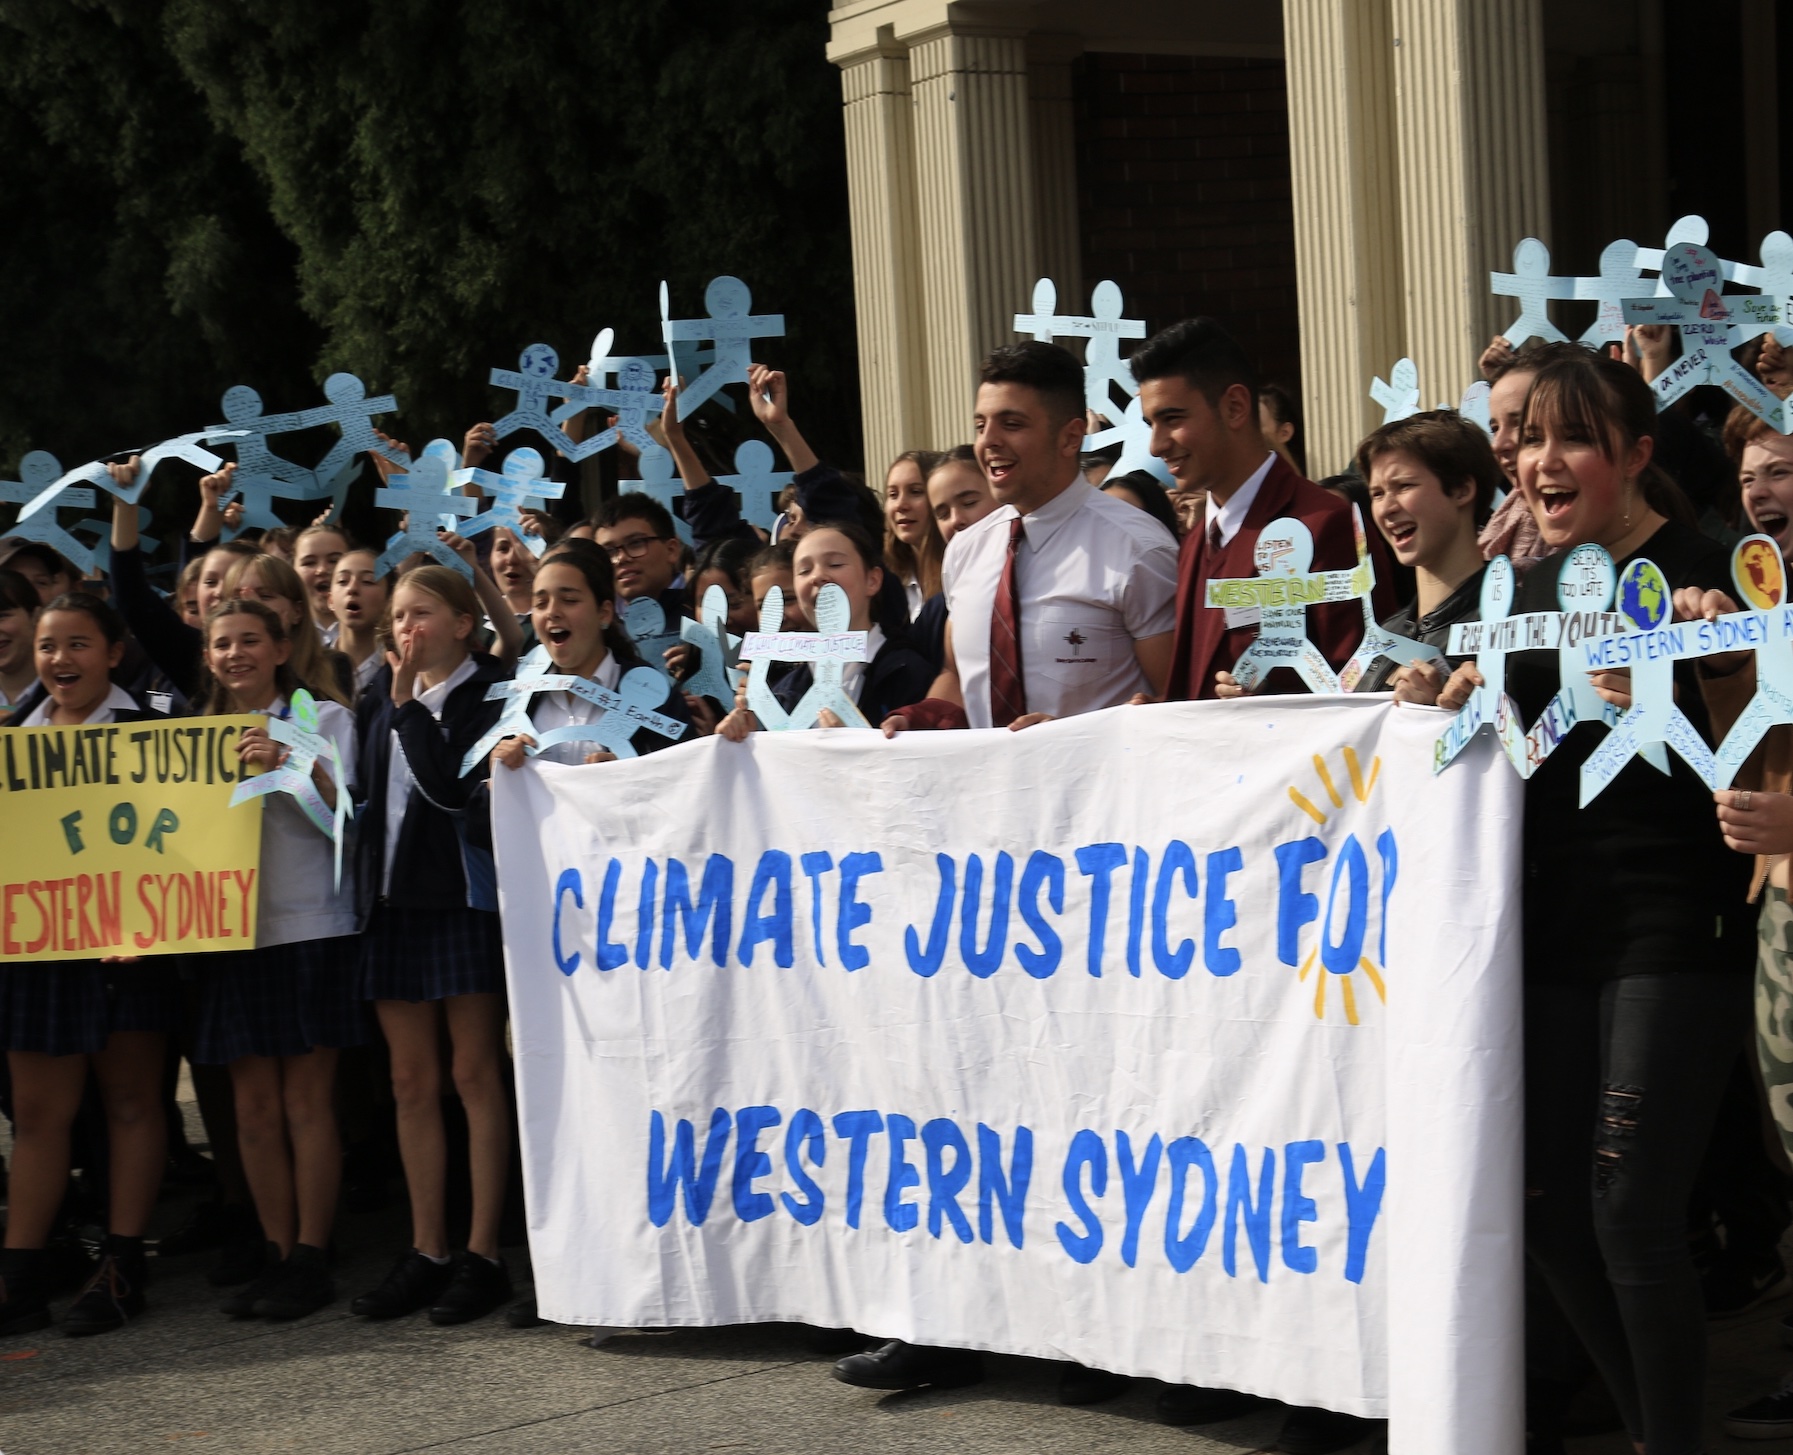 Western Sydney Climate Justice Fellowship